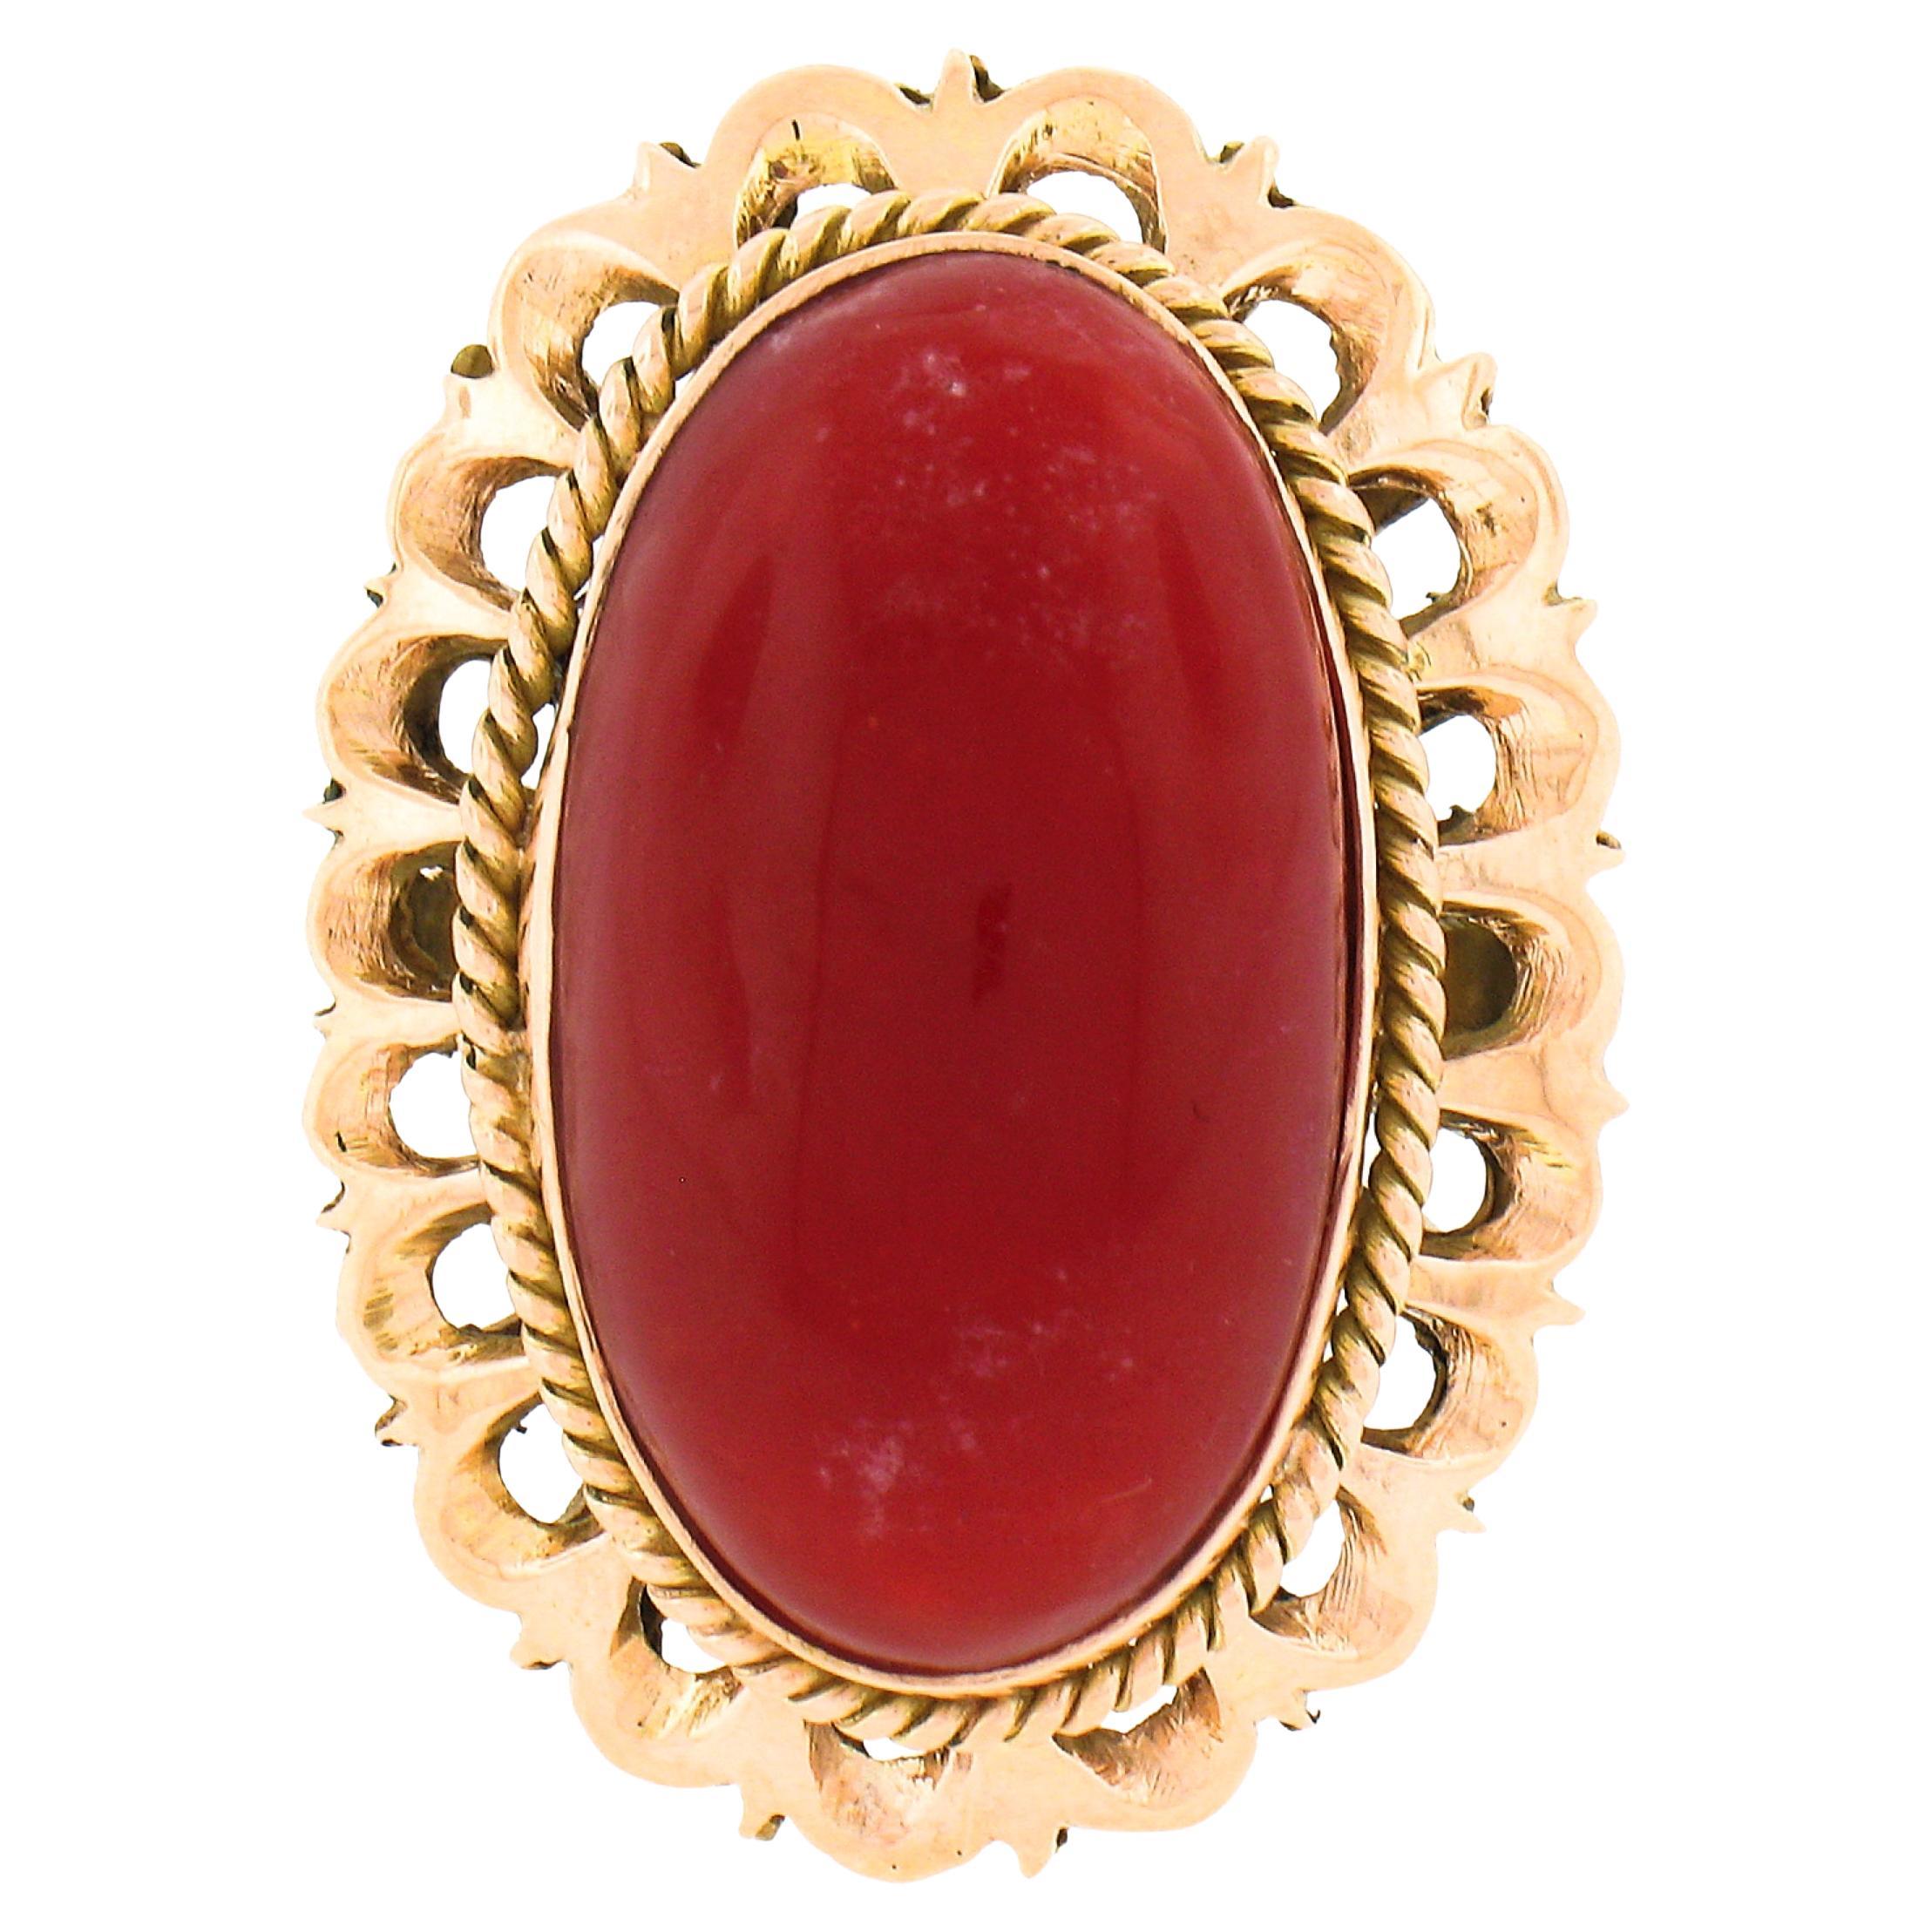 Vintage 18k Gold GIA Oval Cabochon Orangy-Red Coral w/ Open Work Frame Ring